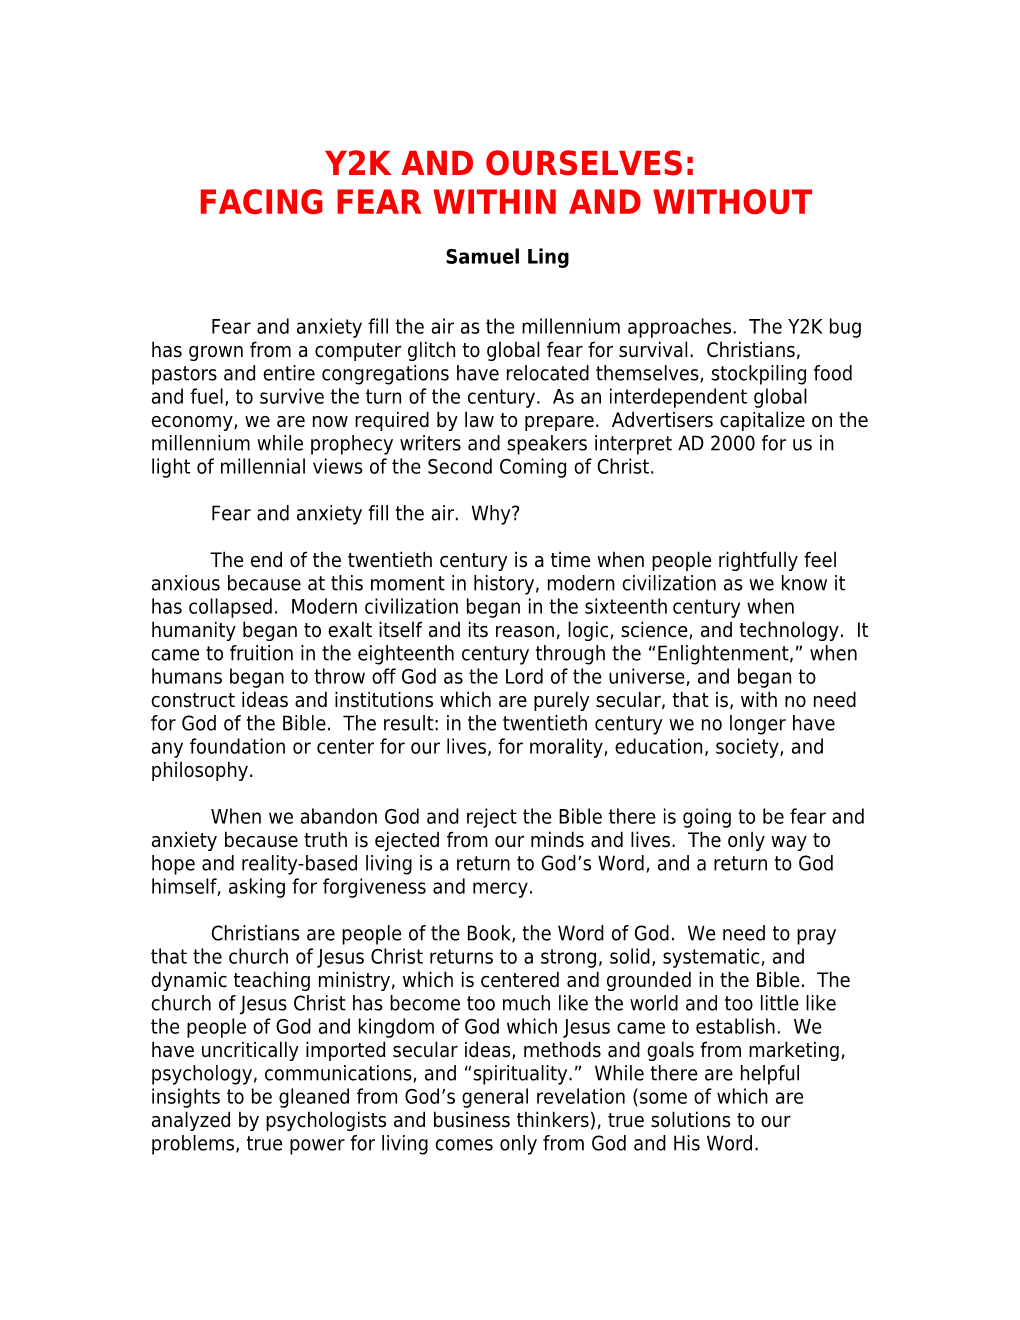 Facing Fear Within and Without